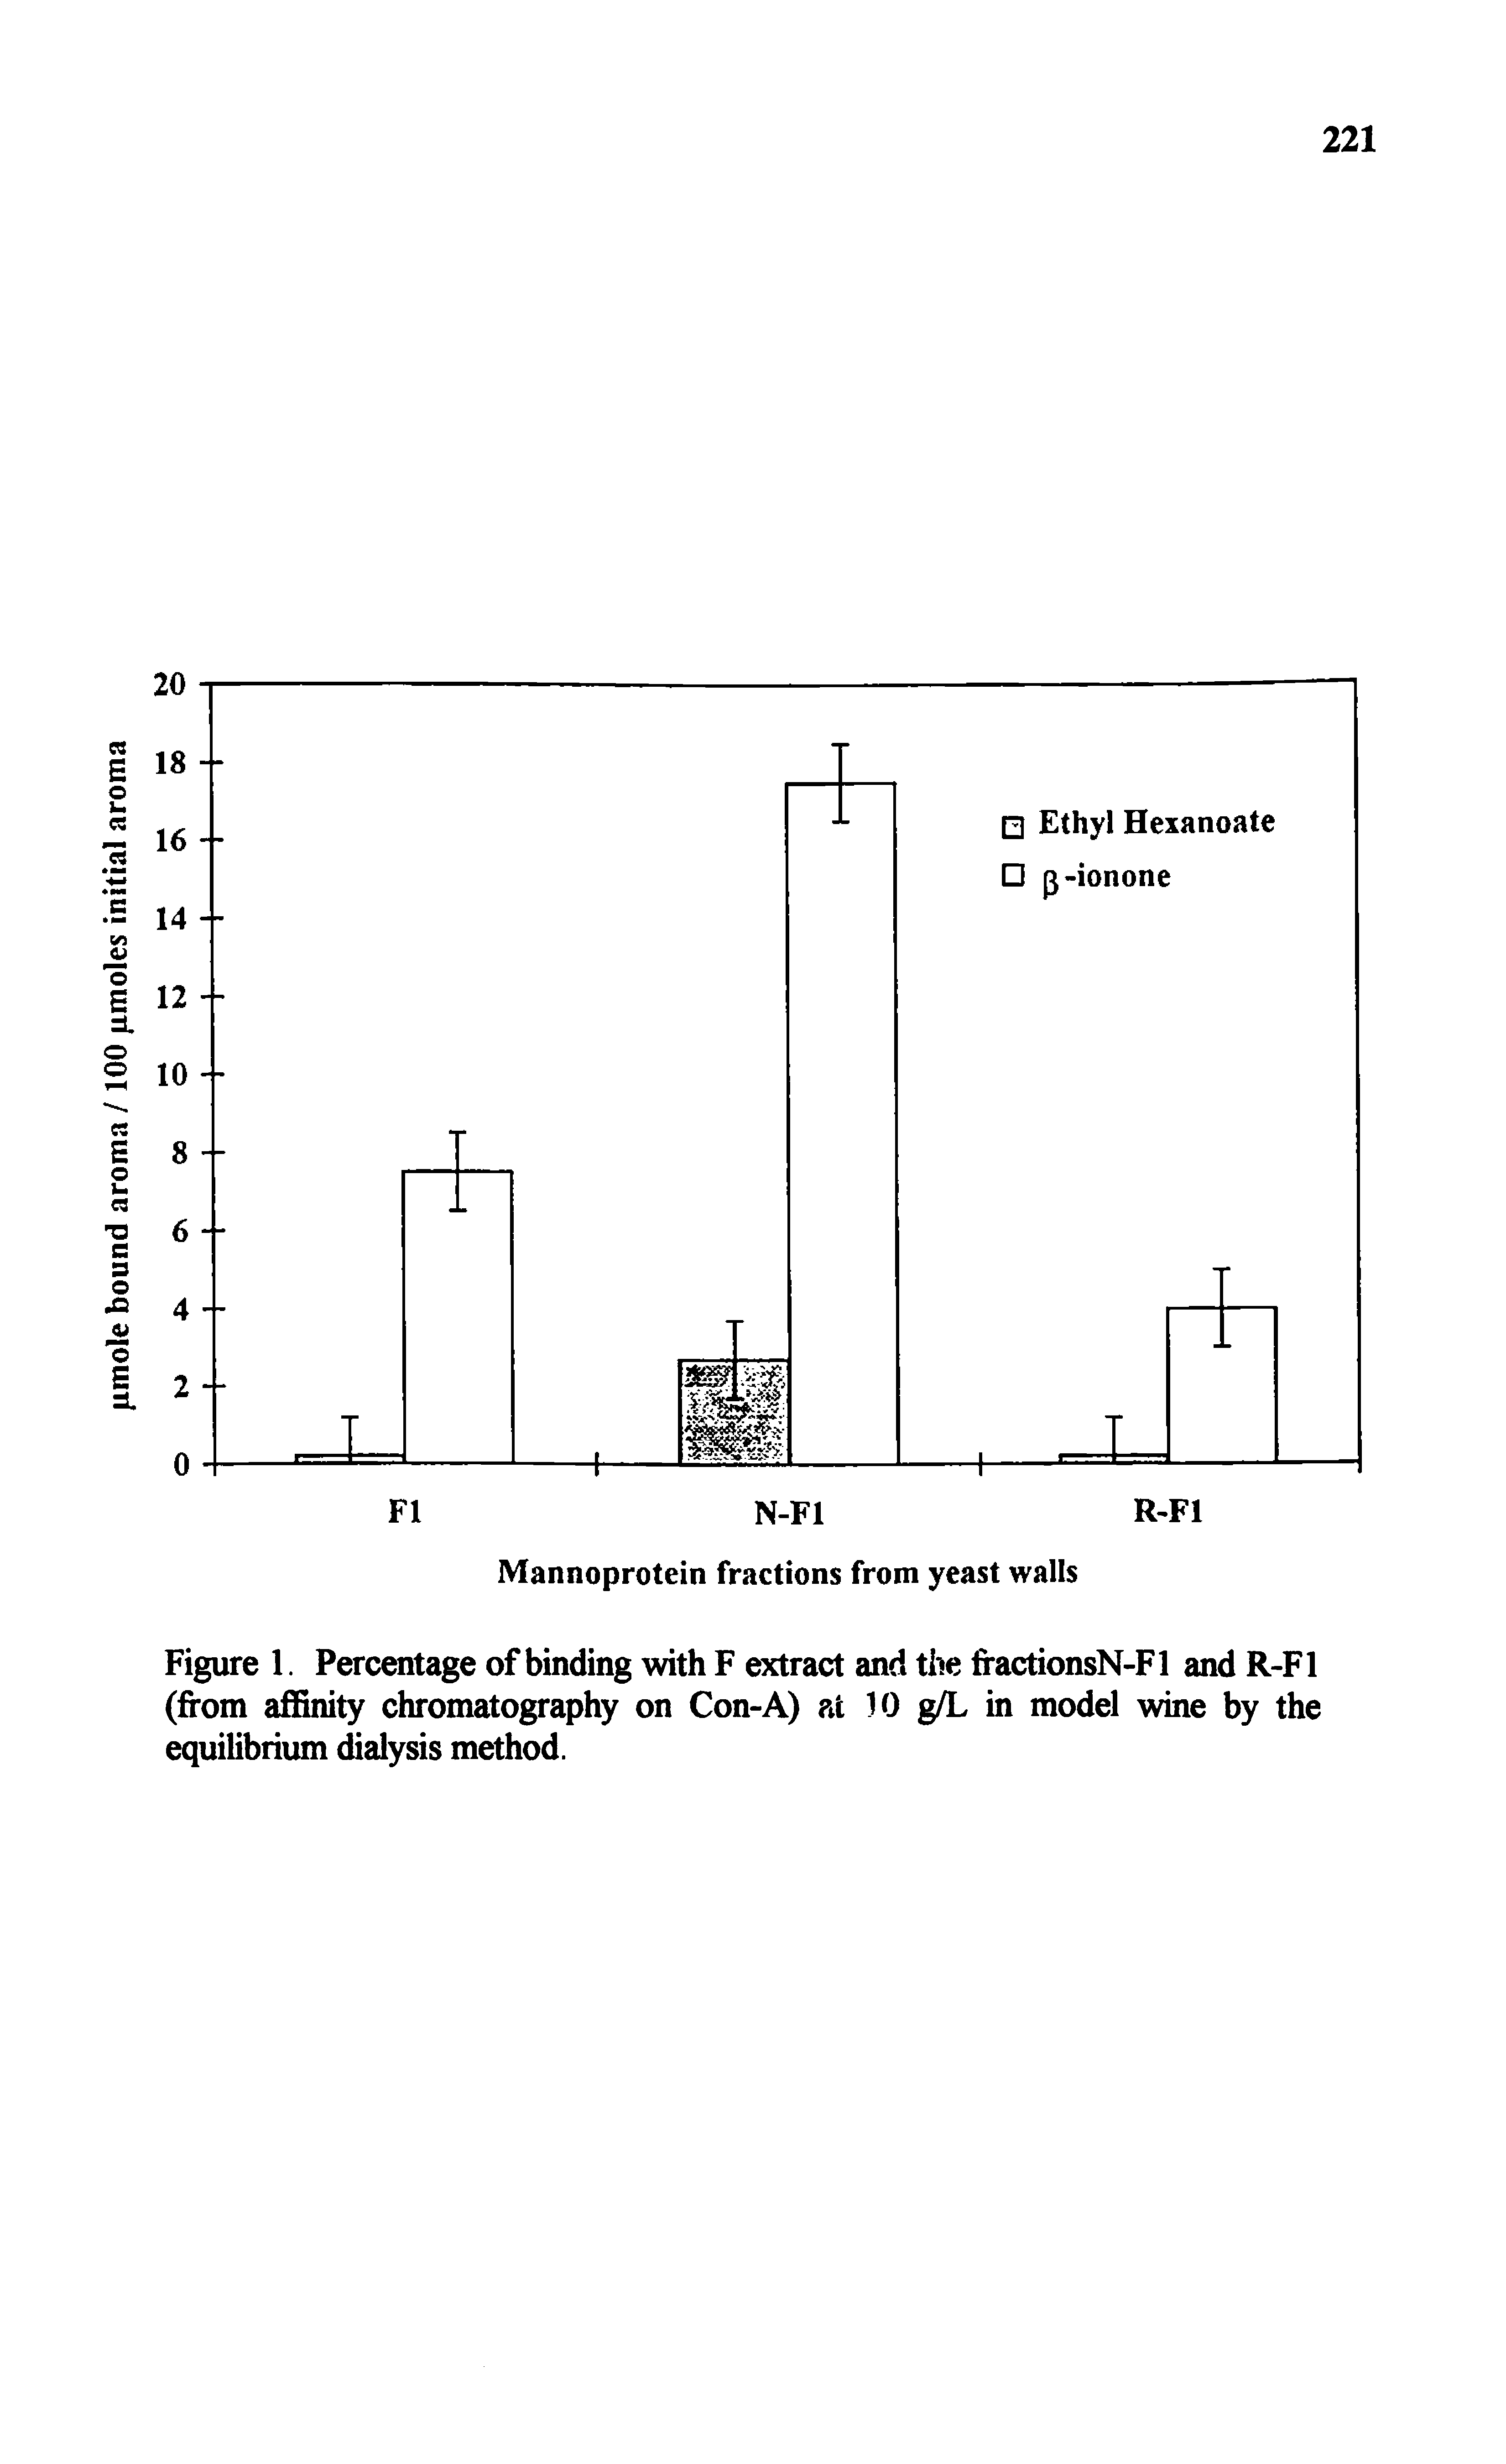 Figure 1. Percentage of binding with F extract and the fractionsN-Fl and R-Fl (from affinity chromatography on Con-A) at 10 g/L in model wine by the equilibrium dialysis method.